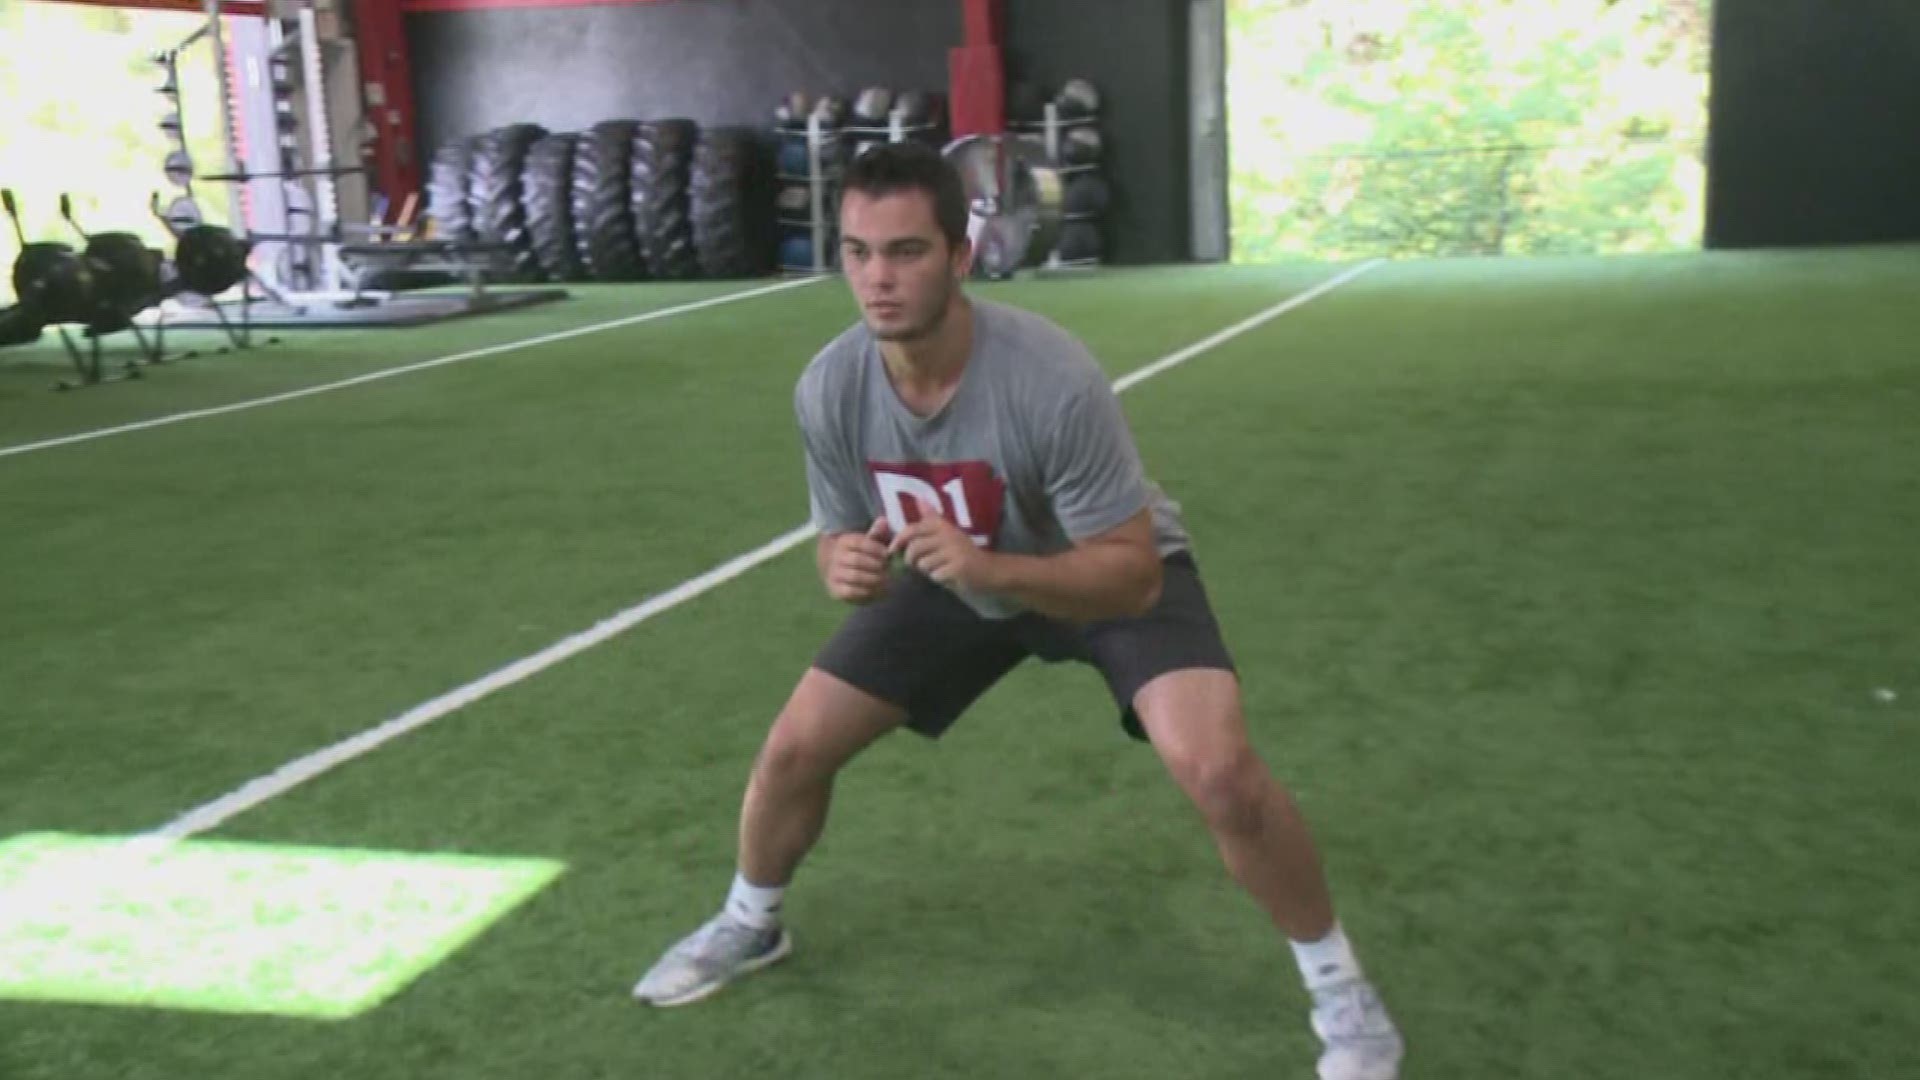 CHI St. Vincent partners with D1 to train athletes in ways that prevent injury.